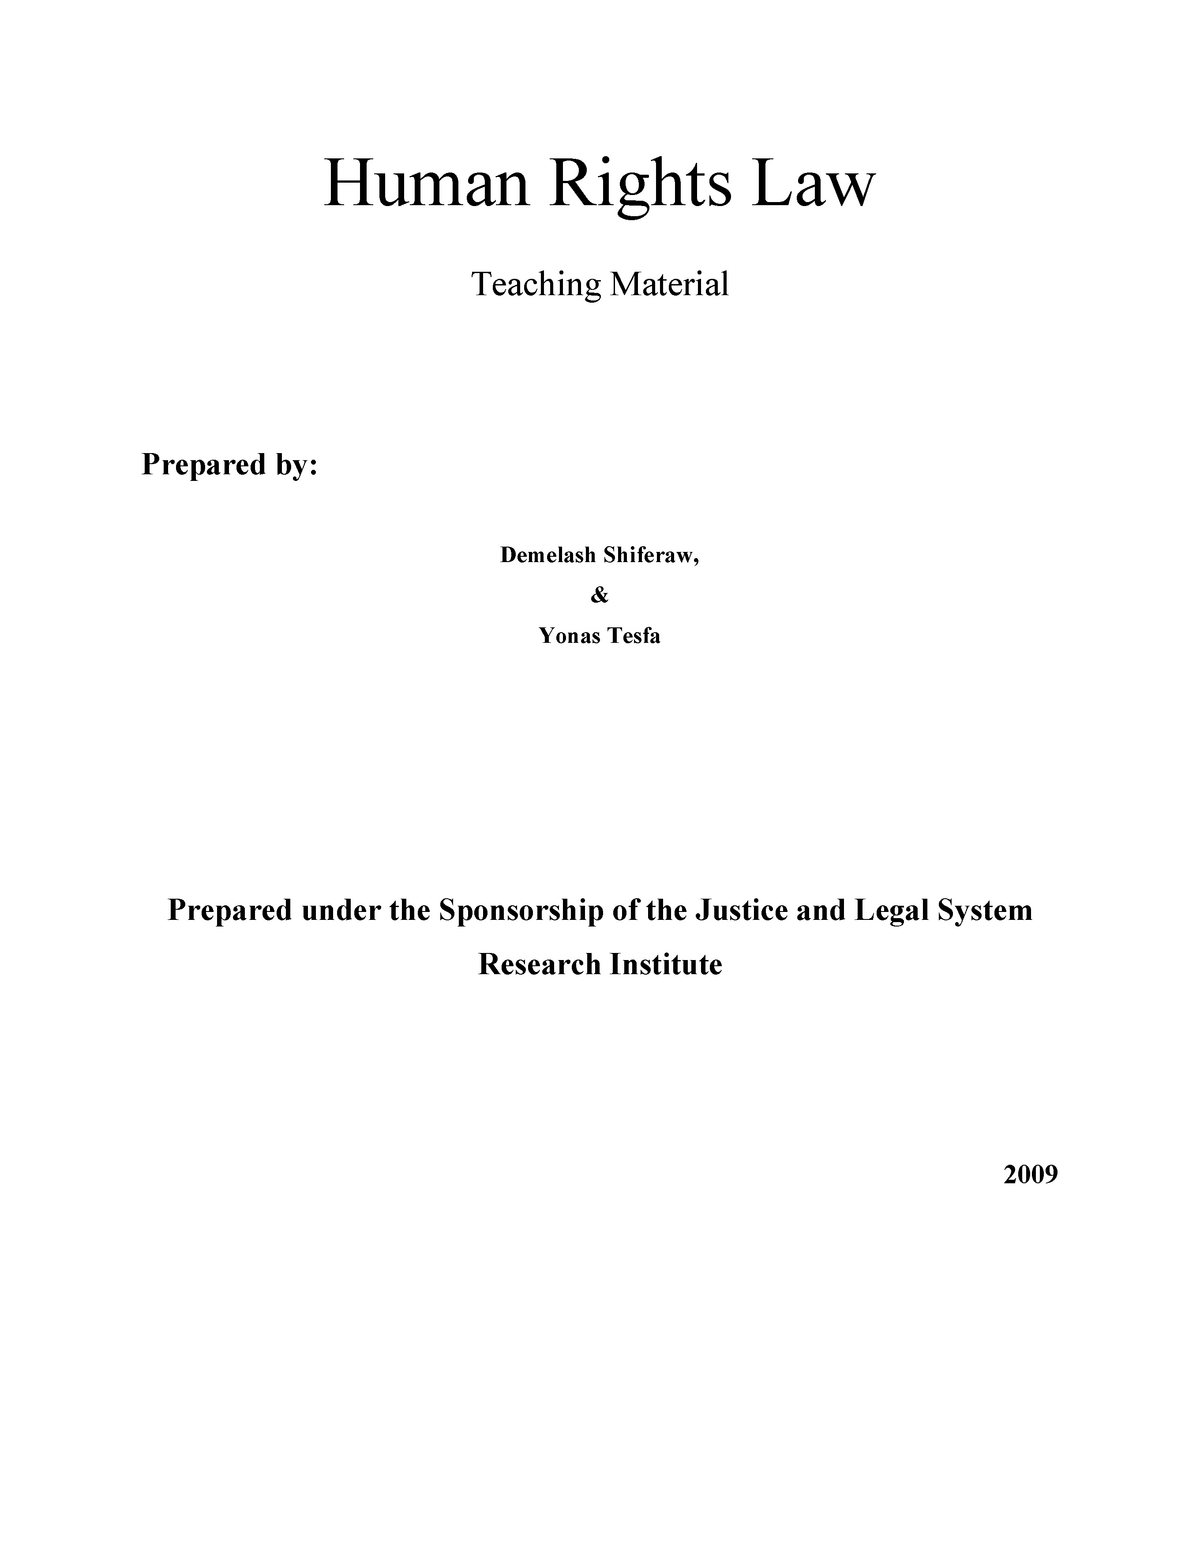 essay about international human rights law